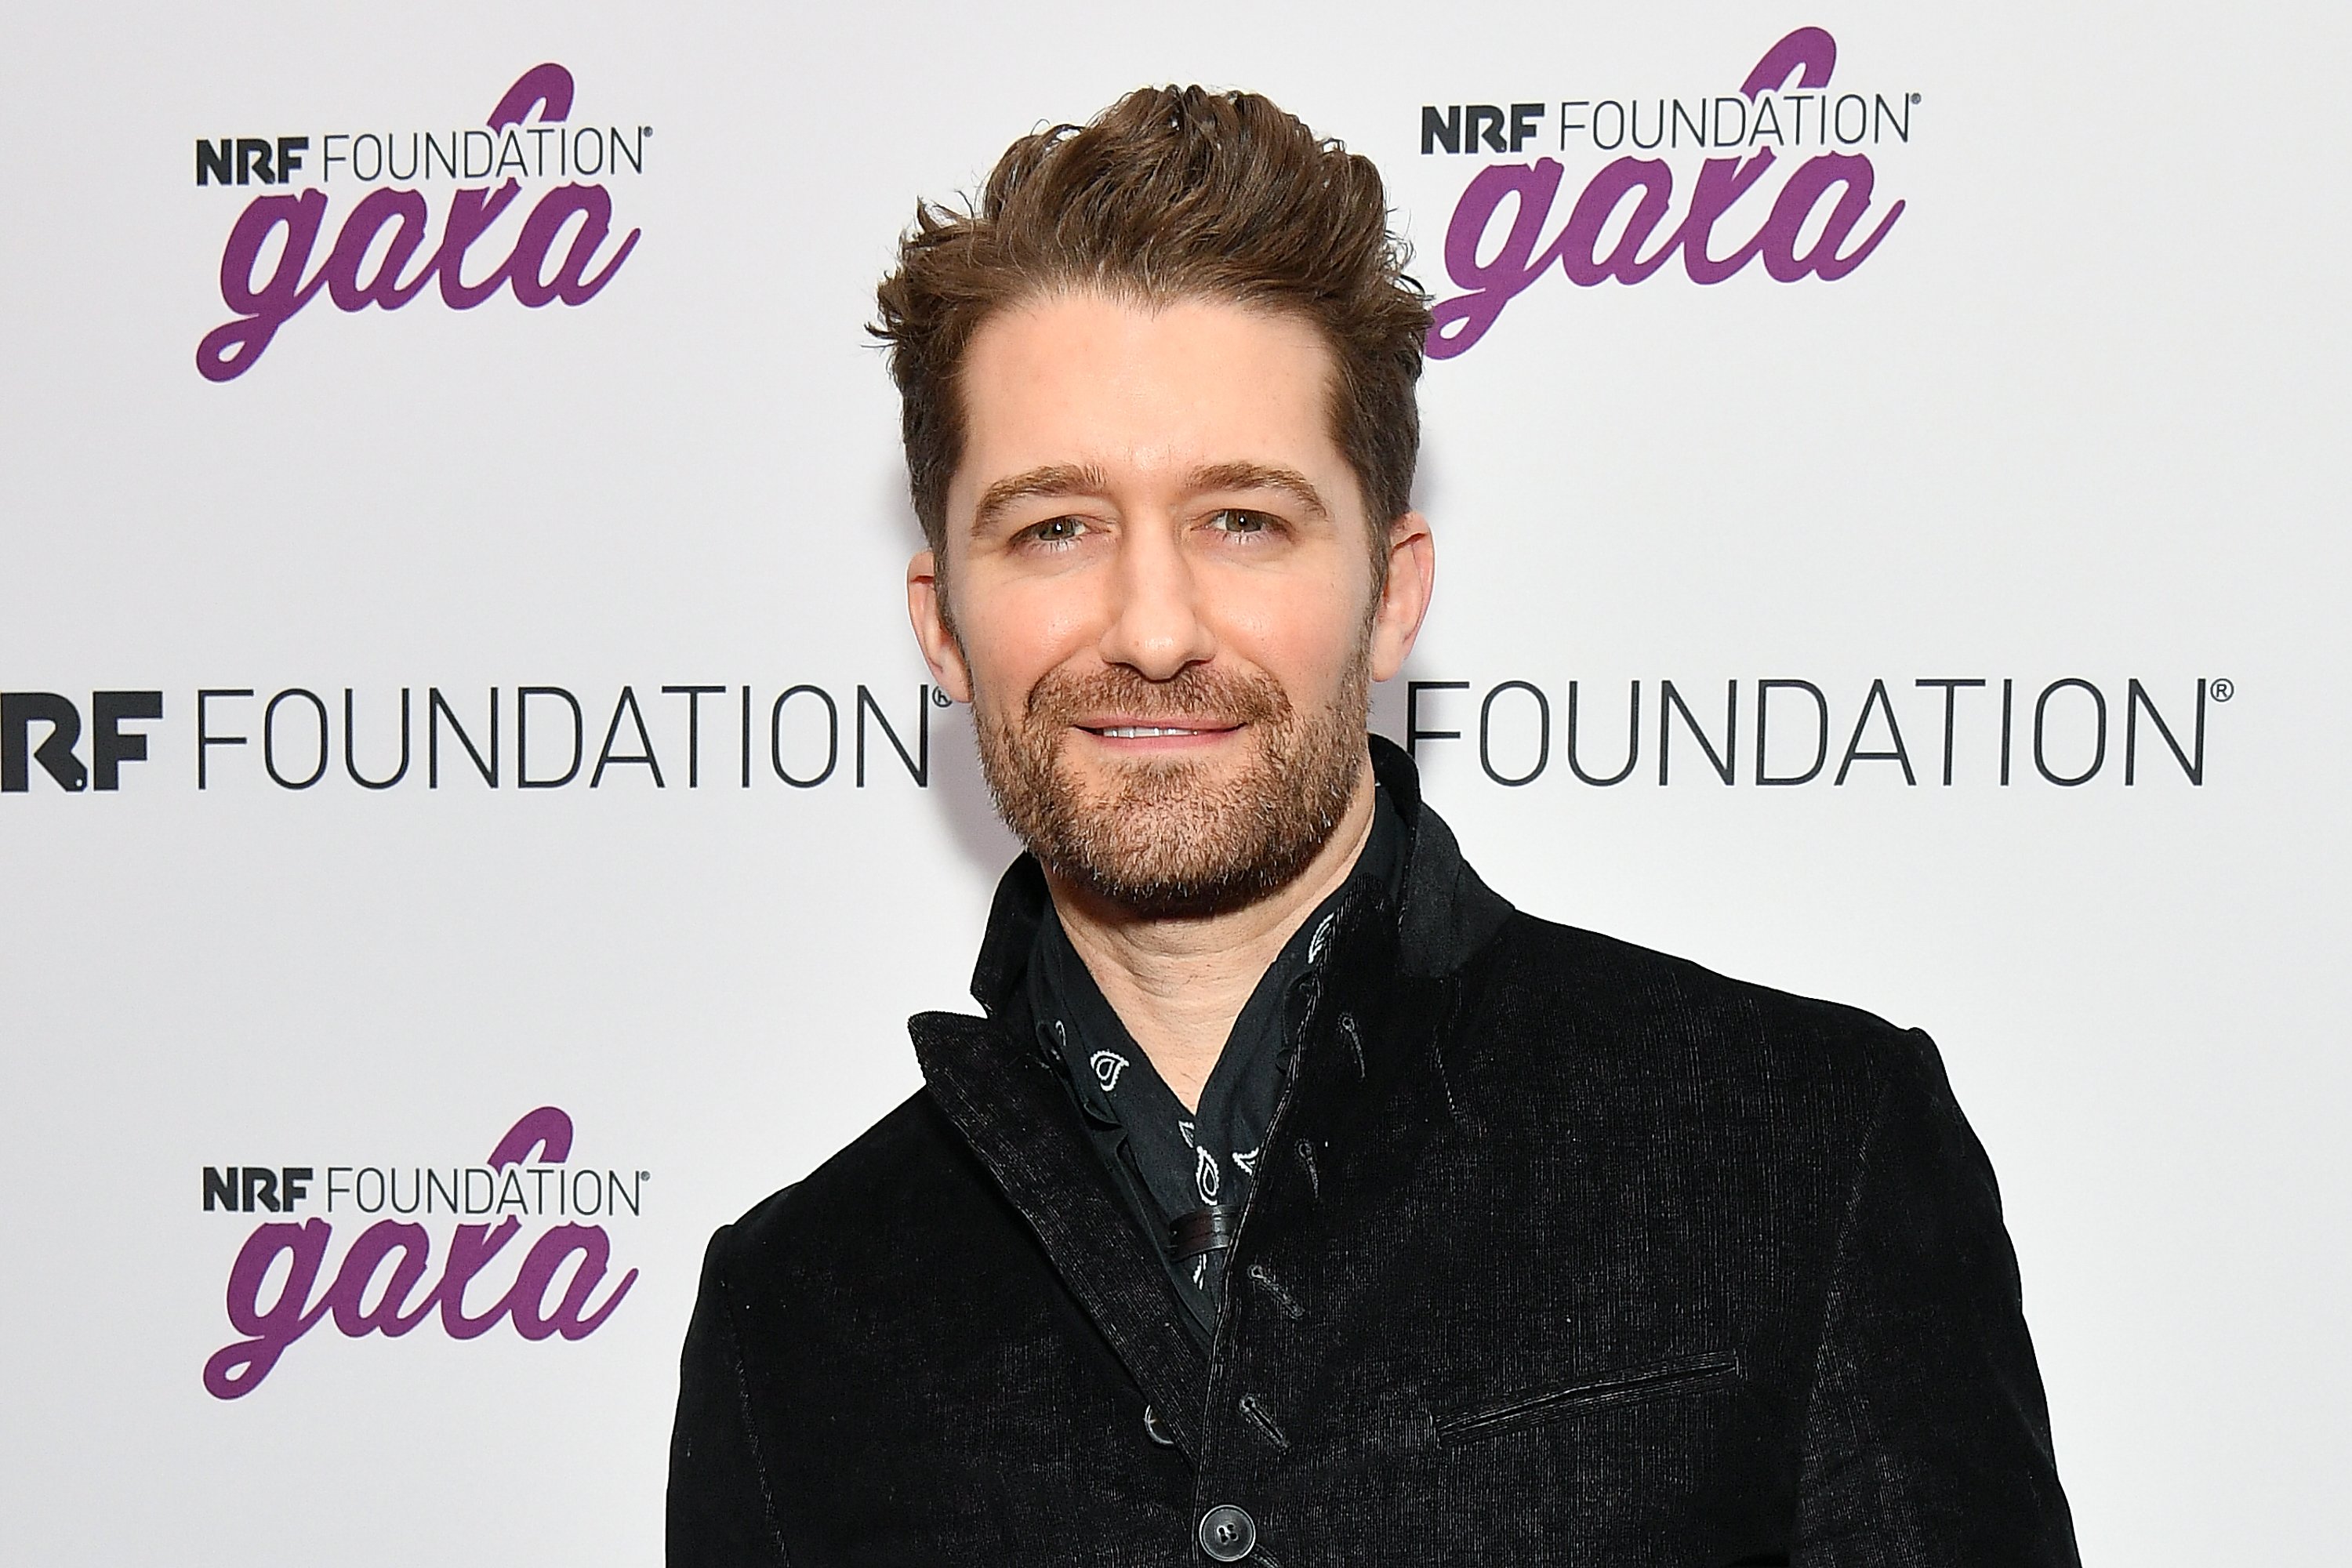 Matthew Morrison attends the 5th Annual NRF Foundation Gala at the Sheraton New York Times Square on January 13, 2019 in New York City | Photo: Getty Images